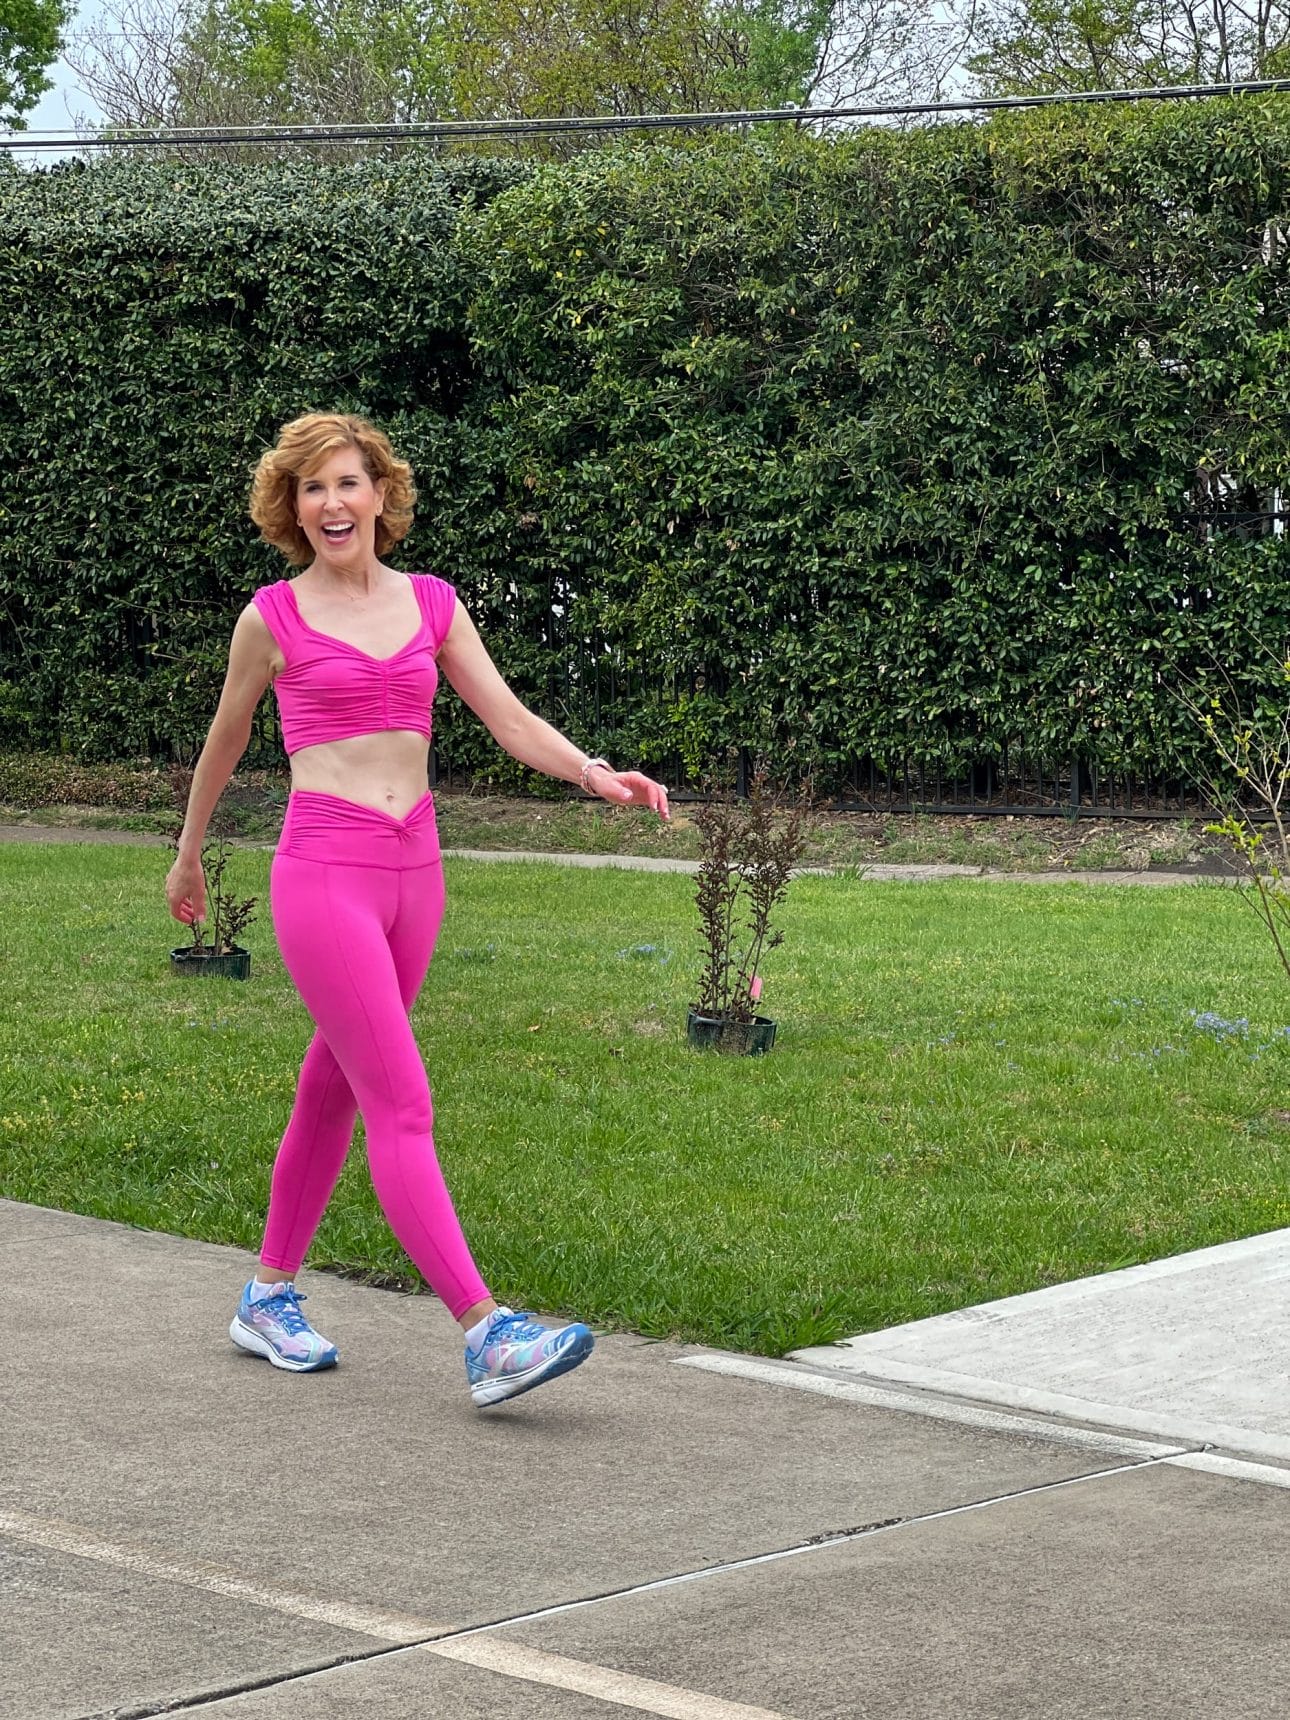 Workout Clothes for Women over 50 as Part of Staying Healthy